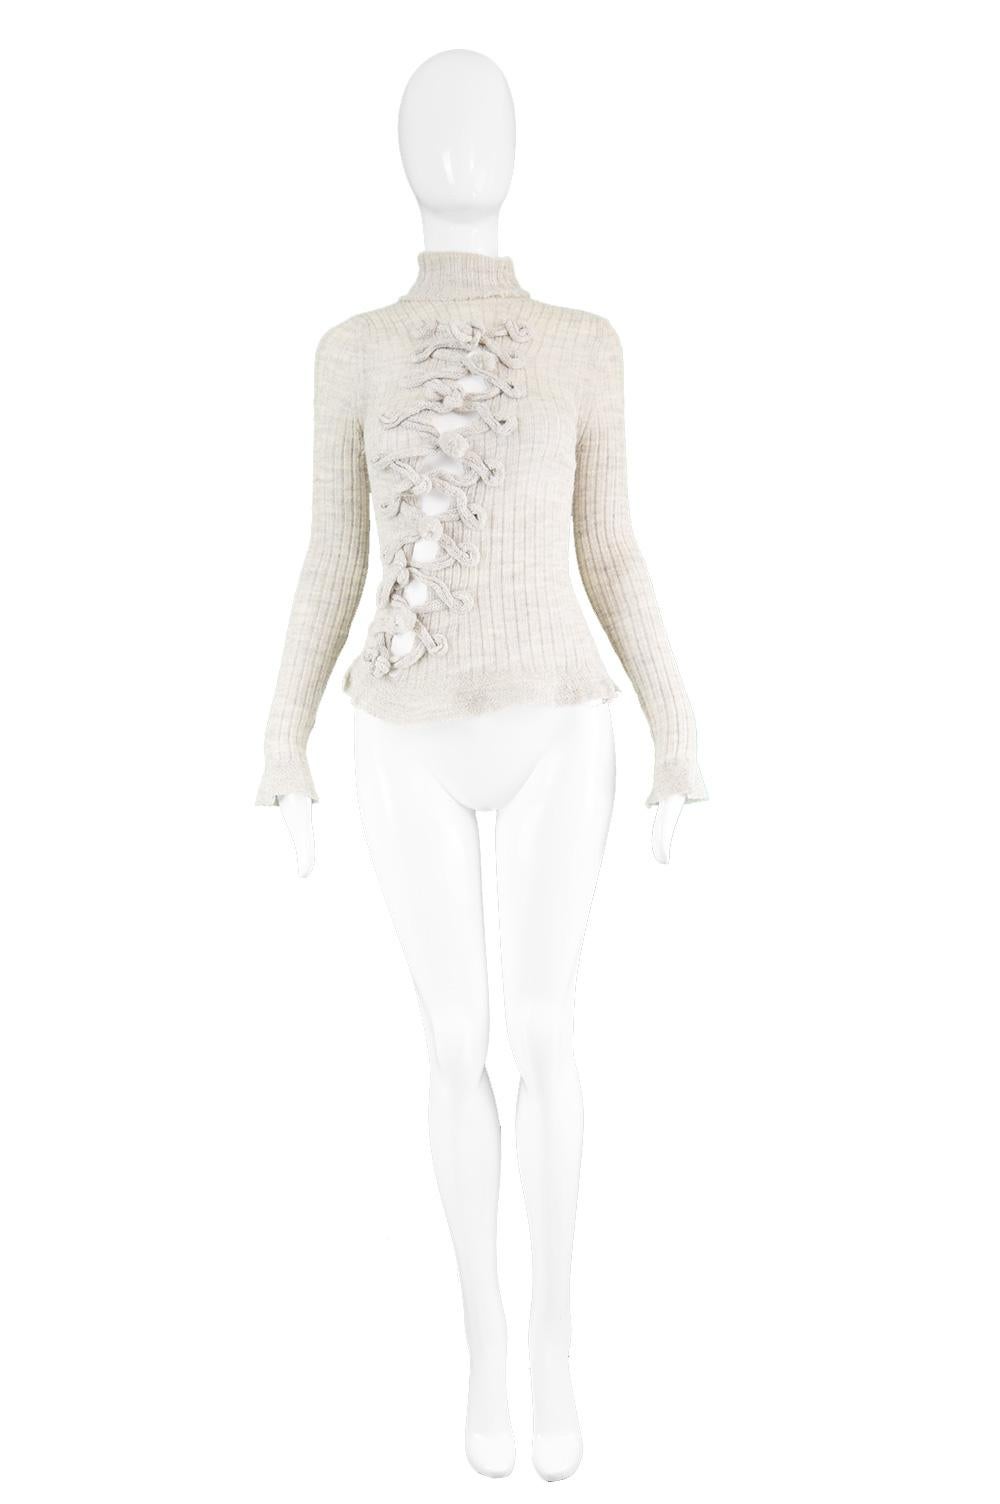 Jean Paul Gaultier Vintage Fine Knitted Turtleneck Cut Out Jumper, 1990s

Estimated Size: Women's Small. Please check measurements. 
Bust - Stretches Up to 34” / 86cm
Waist - Up to 30” / 76cm
Length (Shoulder to Hem) - 22” / 56cm
Sleeve Pit to Cuff